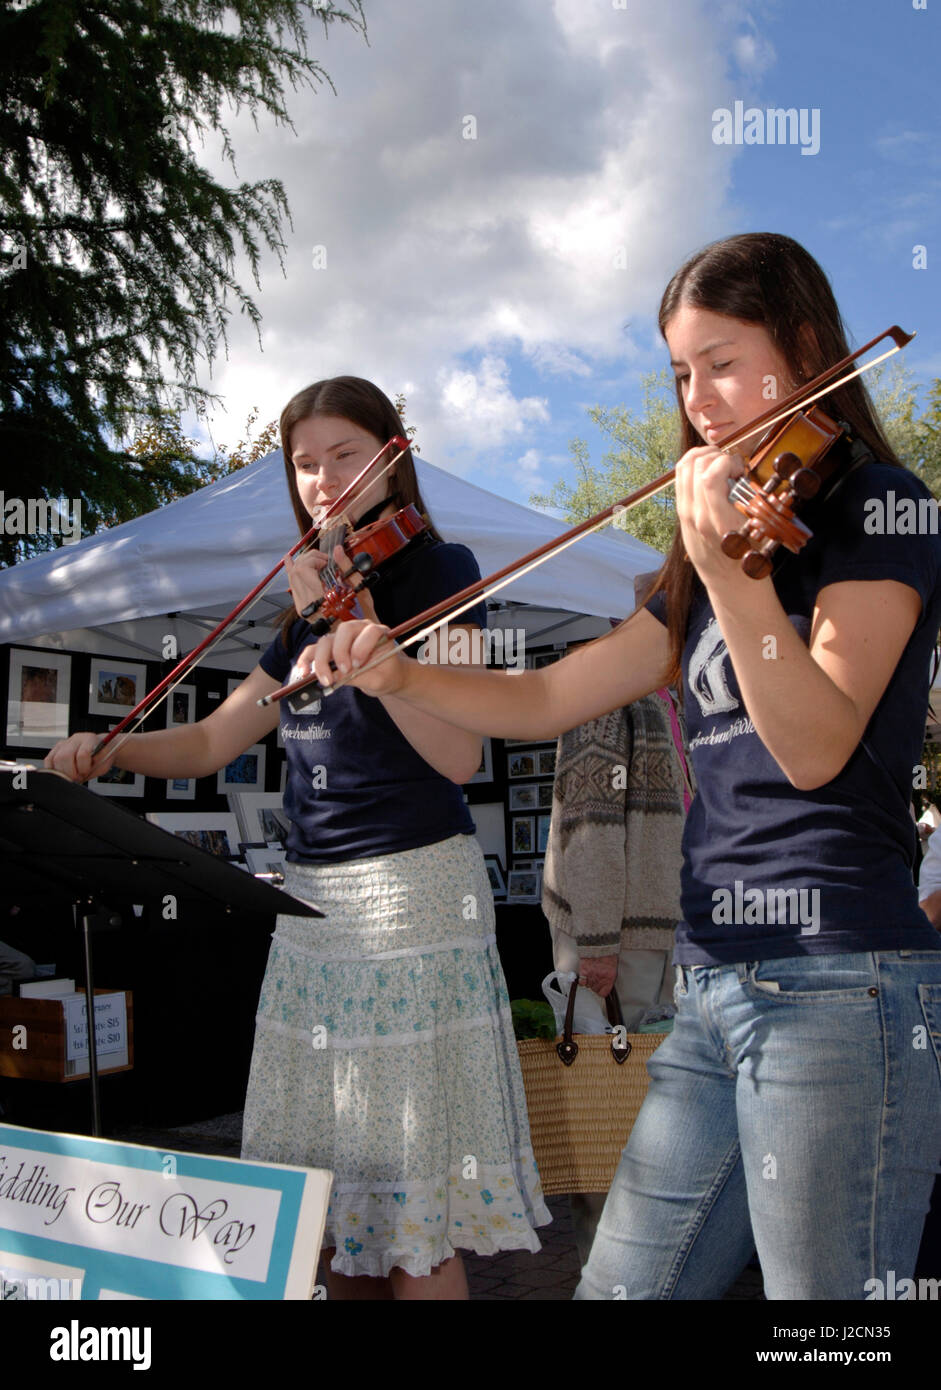 Canada, British Columbia, Salt Spring Island, Ganges. Two violin players performing at the Salt Spring Island Saturday Market located in Ganges (Editorial Use Only) Stock Photo